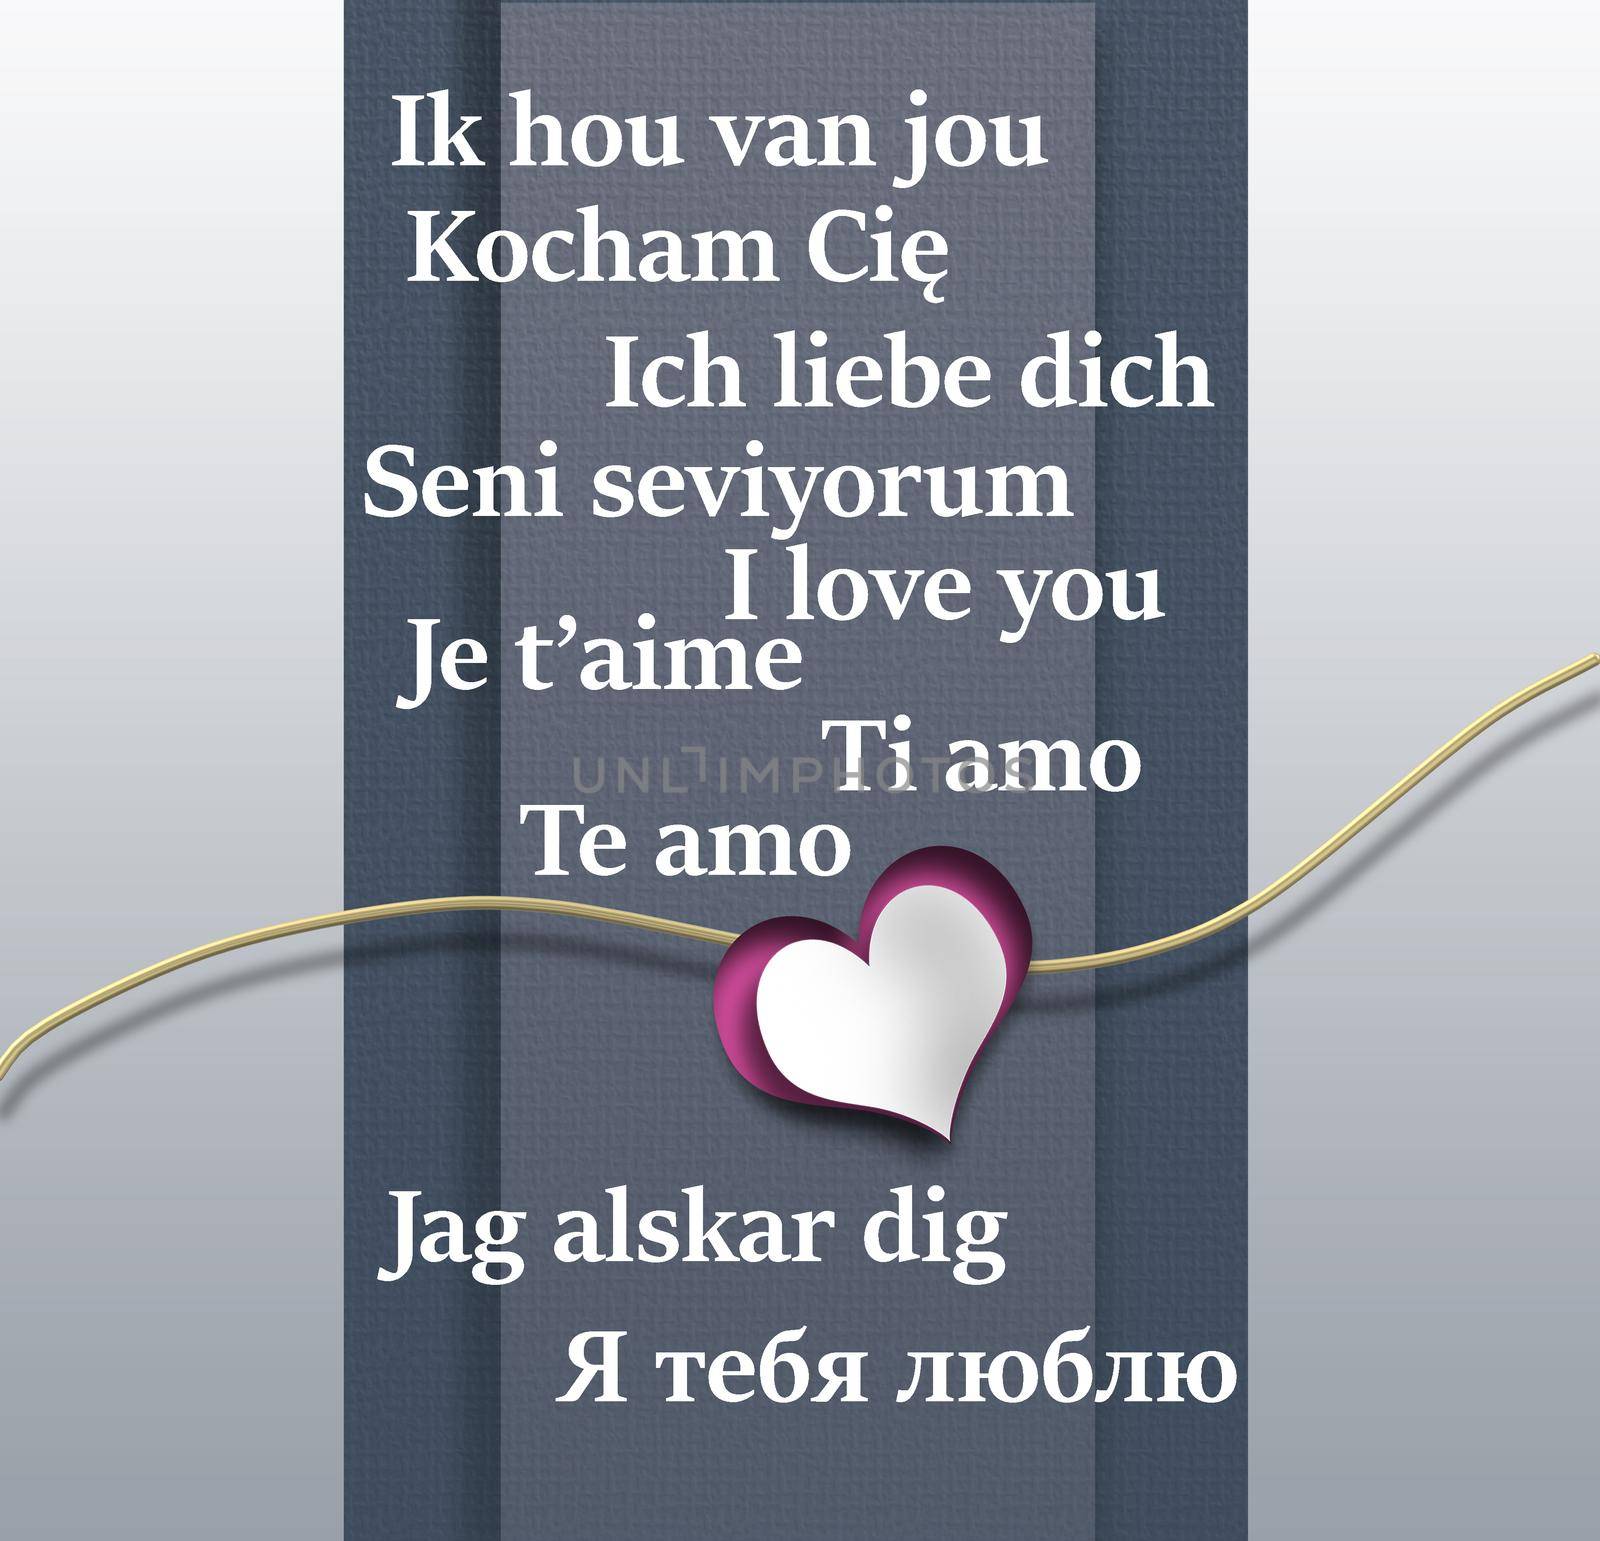 I love you text in different Europian languages. by NelliPolk